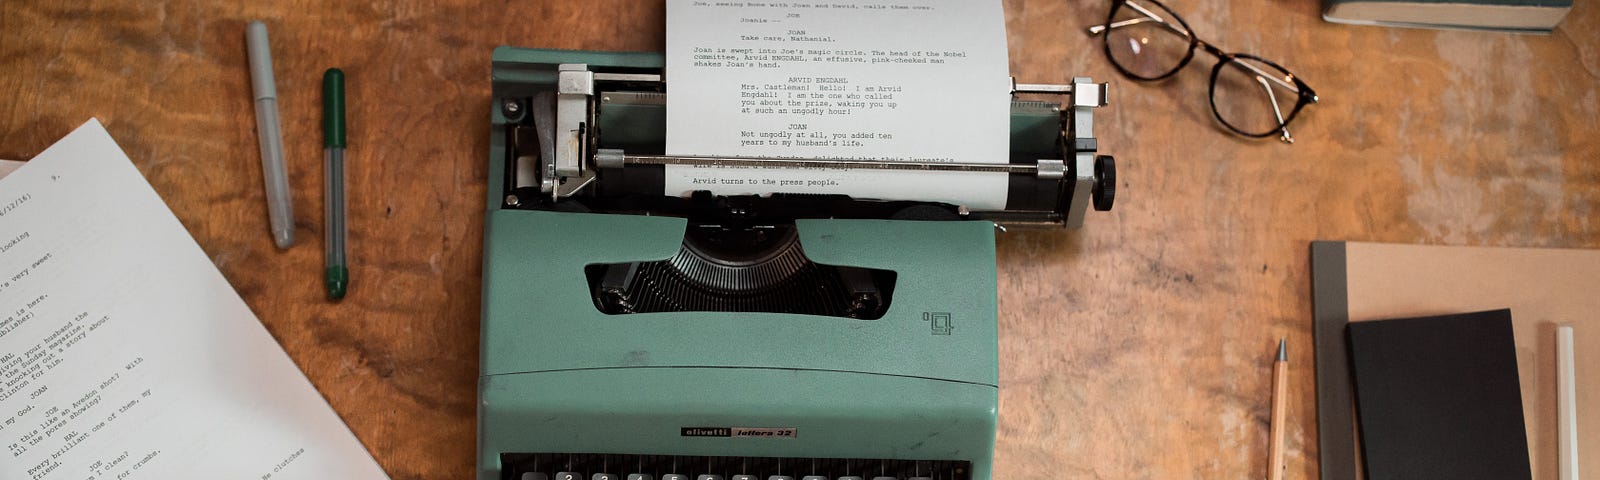 A person typing on a green typewriter on a brown wooden table